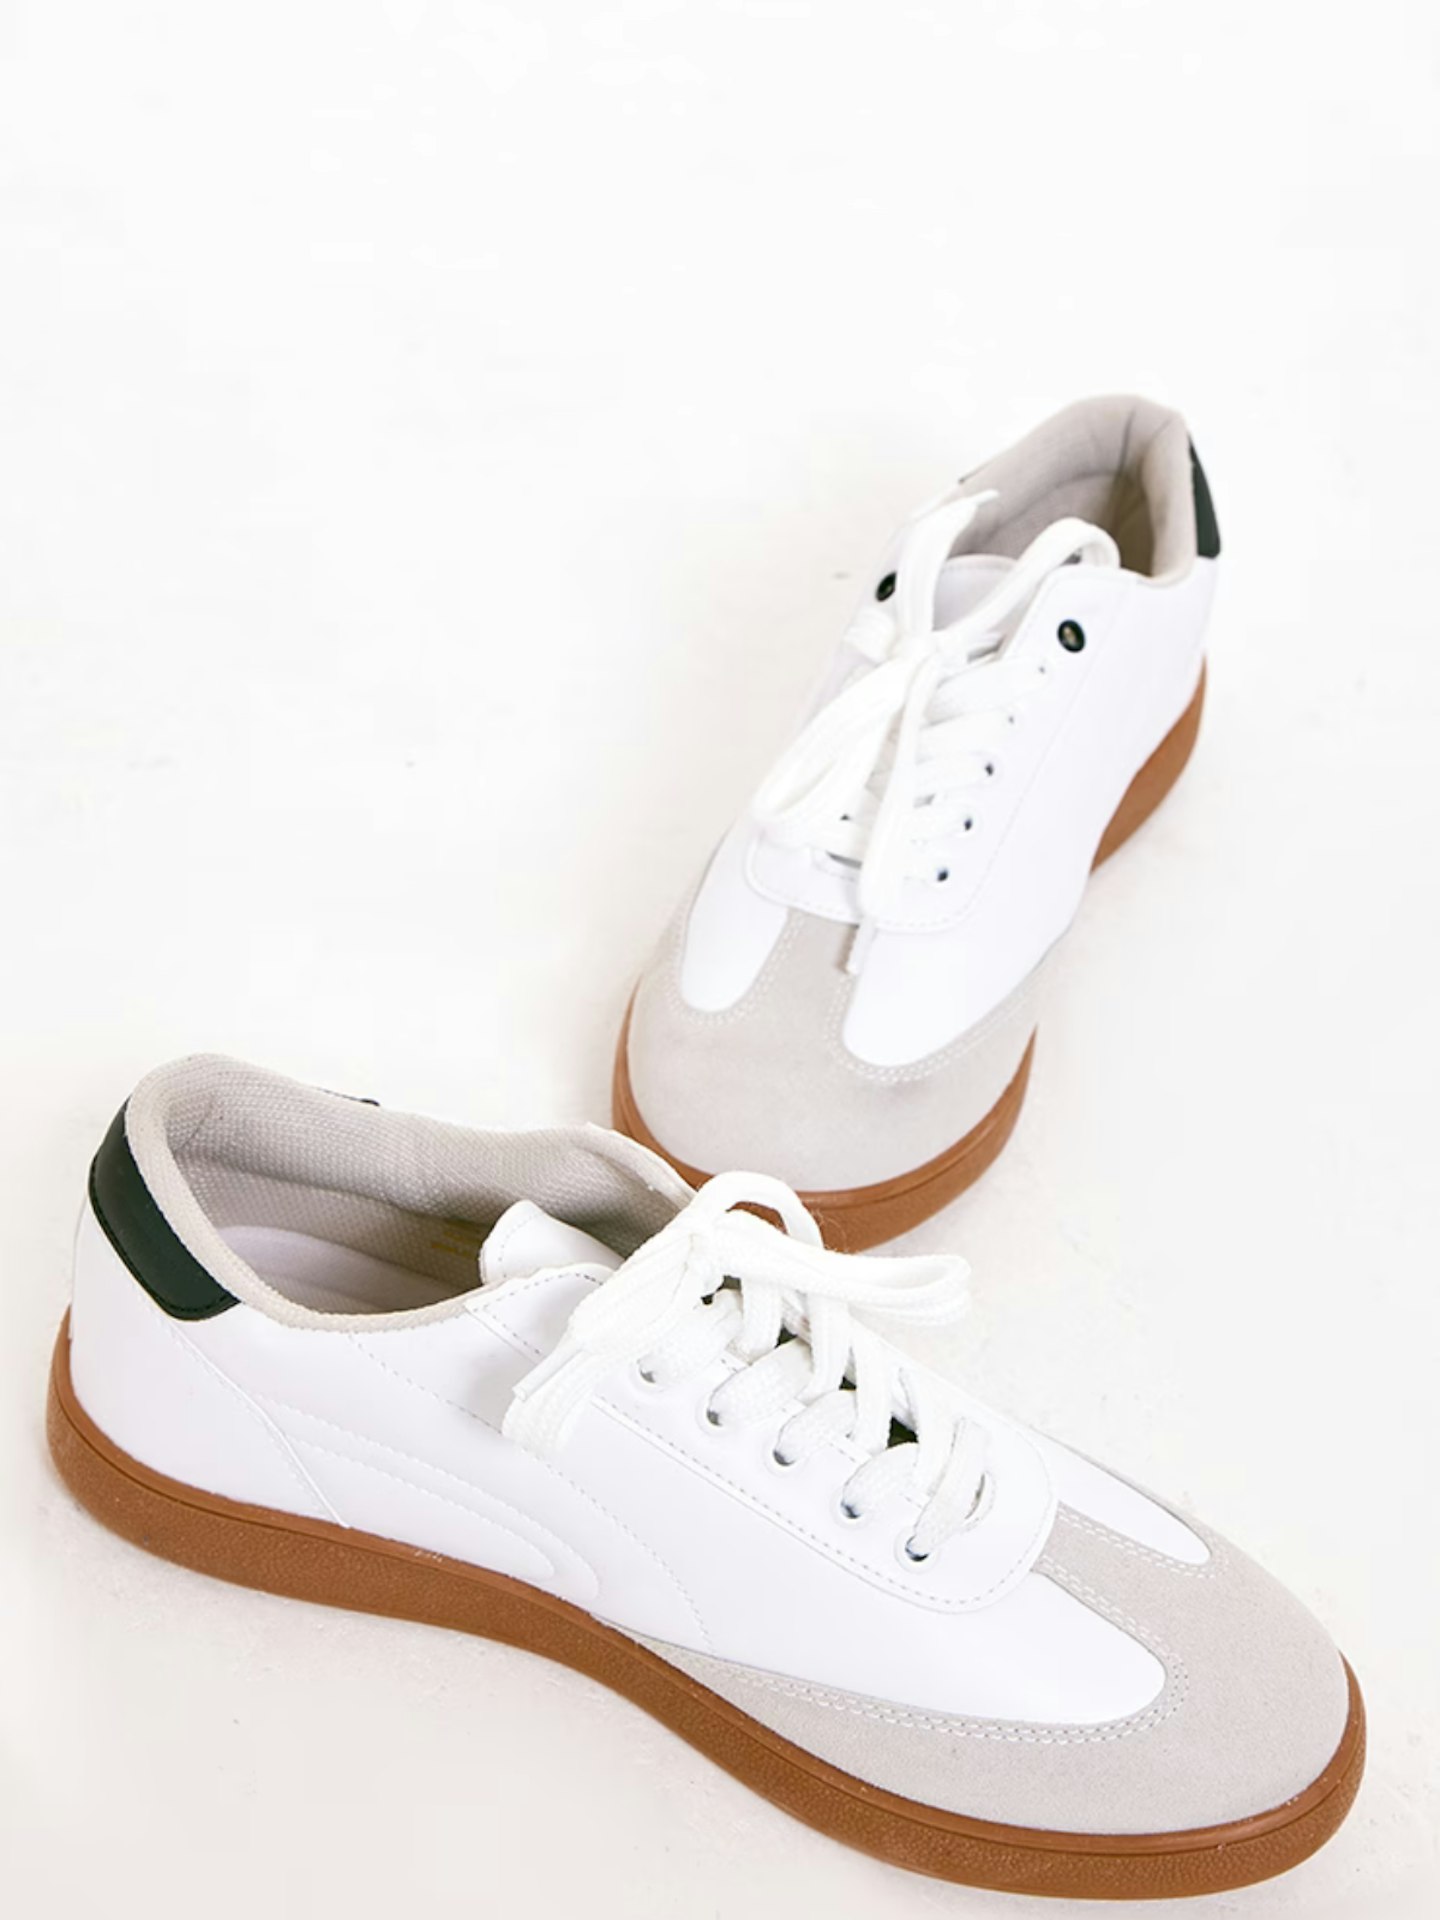 PrettyLittleThing White PU Contrast Panel Low Lace Up Trainers